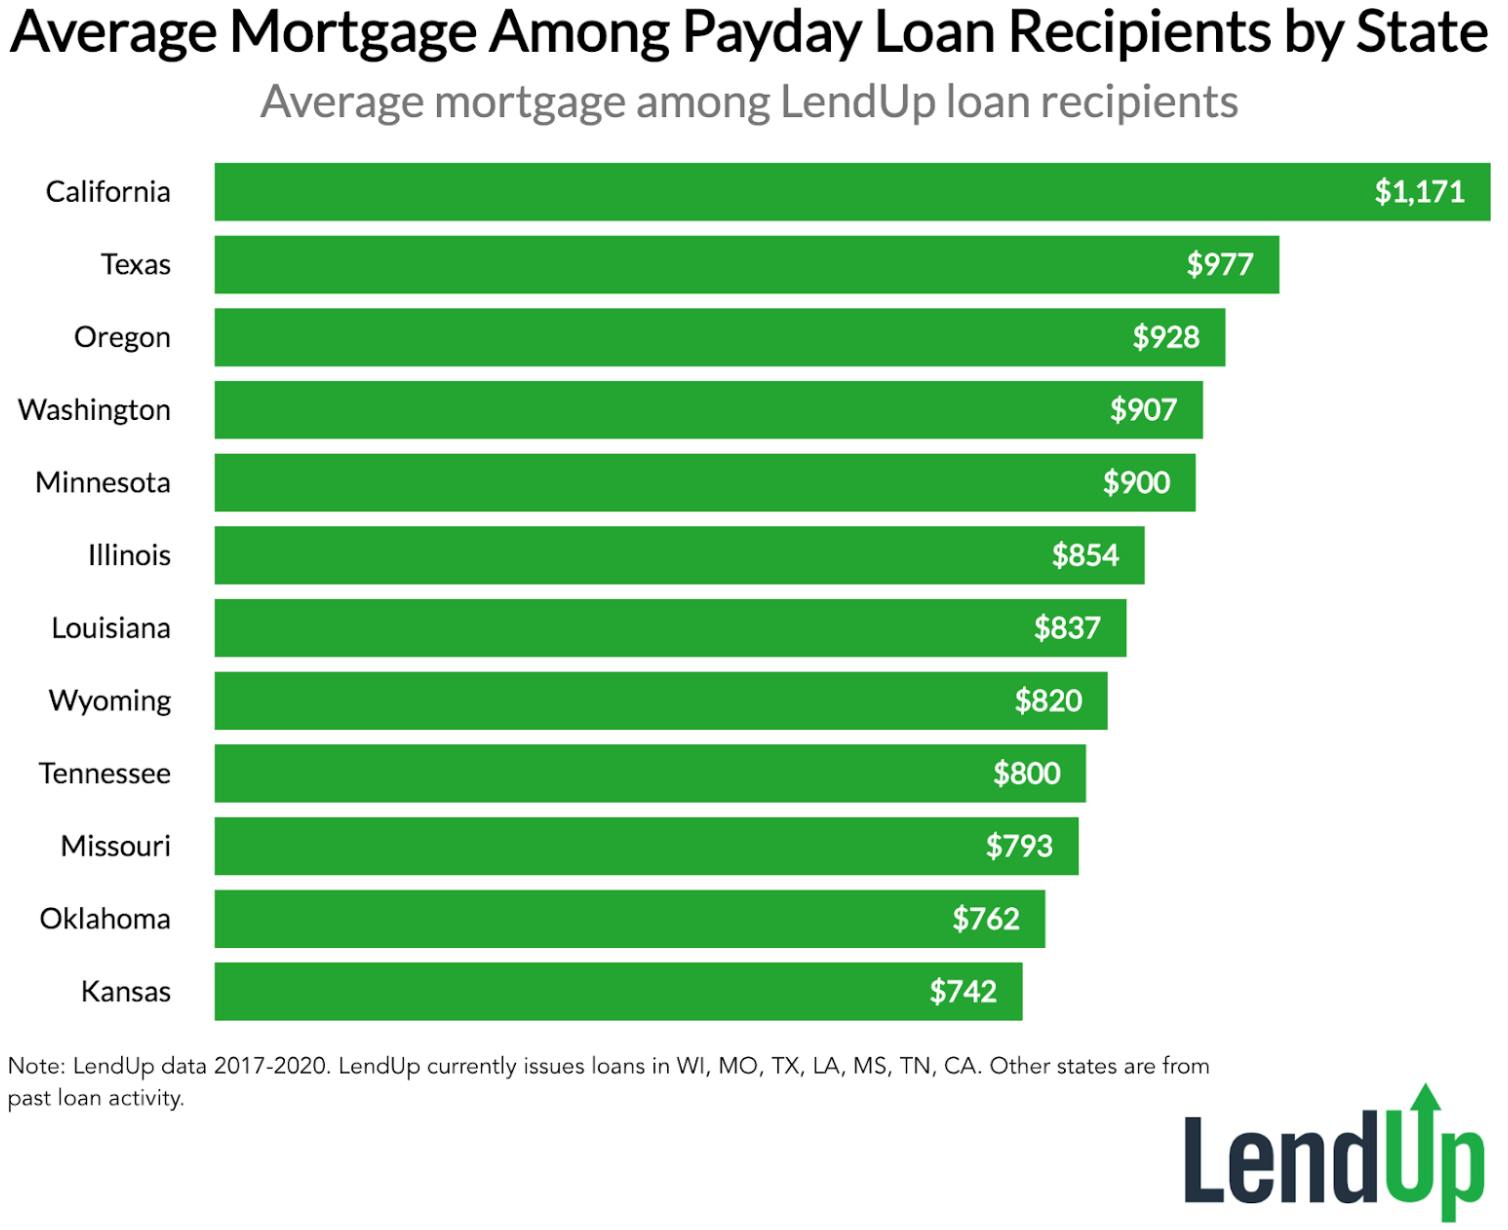 Average Mortgage Among Payday Loan Recipients by State